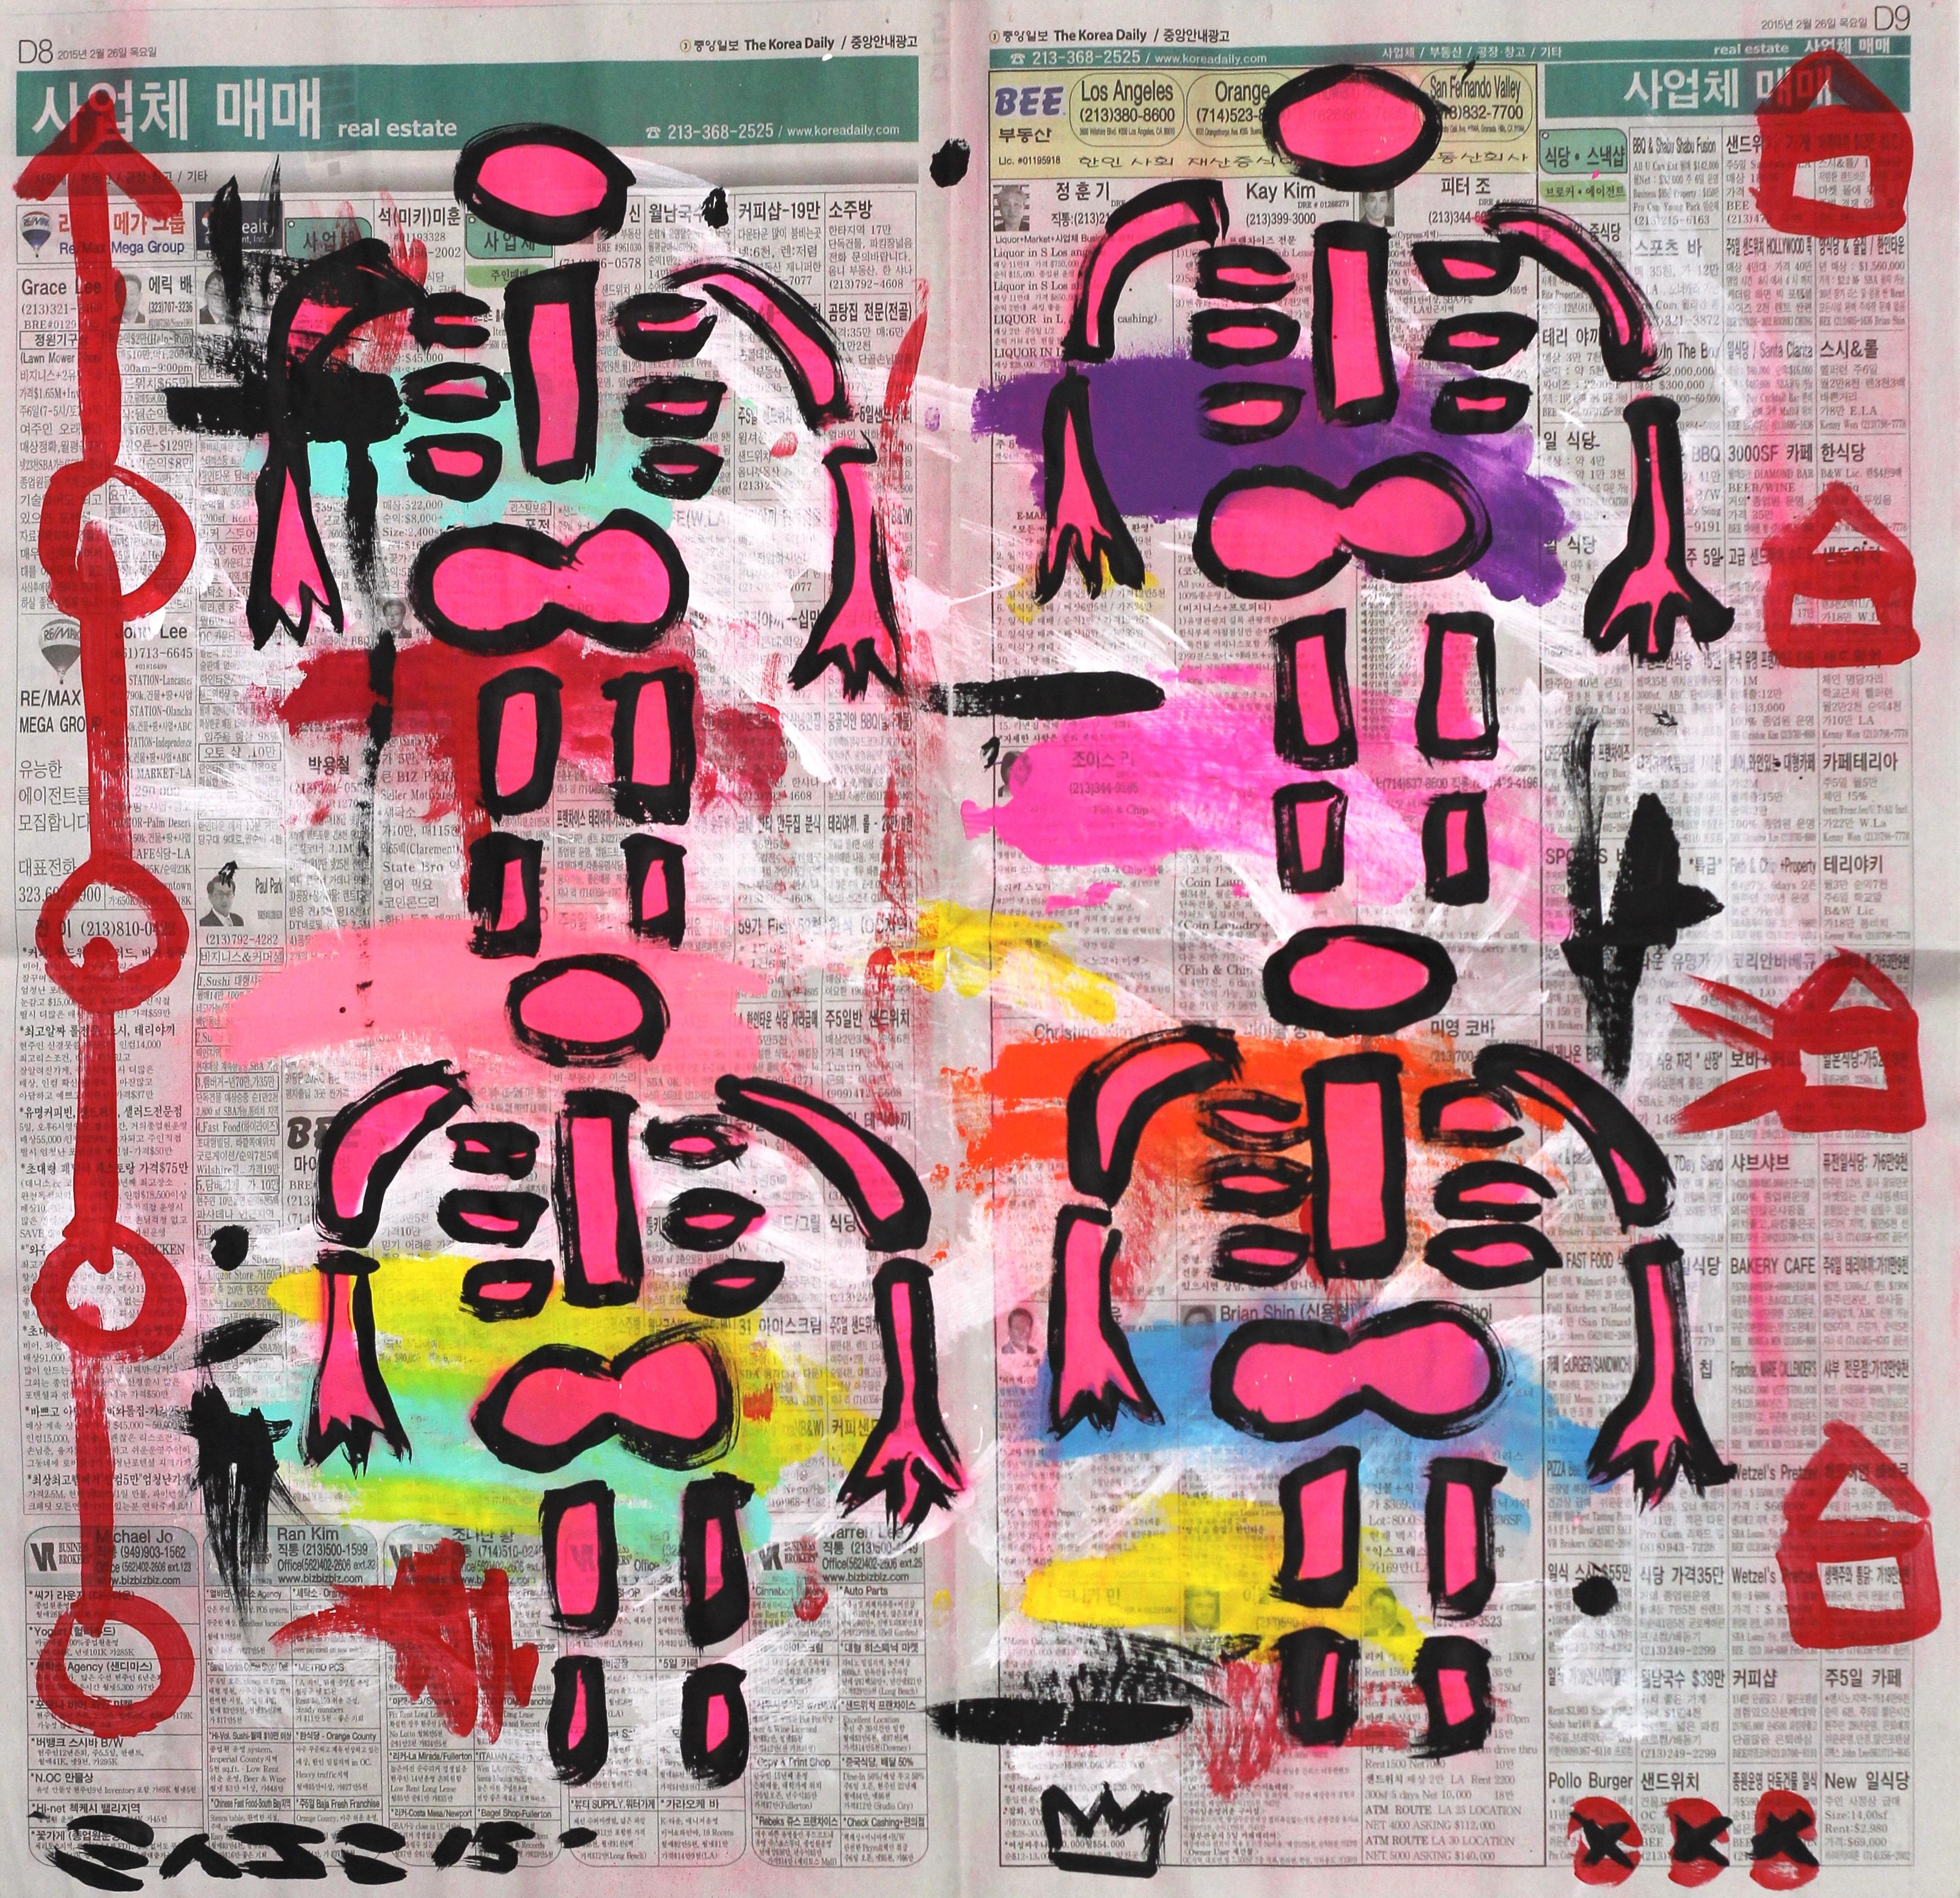 Los Angeles street artist Gary John exploded onto the international art scene during the Art Basel Miami art fair in 2013. John’s playfully bold work quickly gained attention and he was named one of 20 standout artists at the 2014 NY Affordable Art